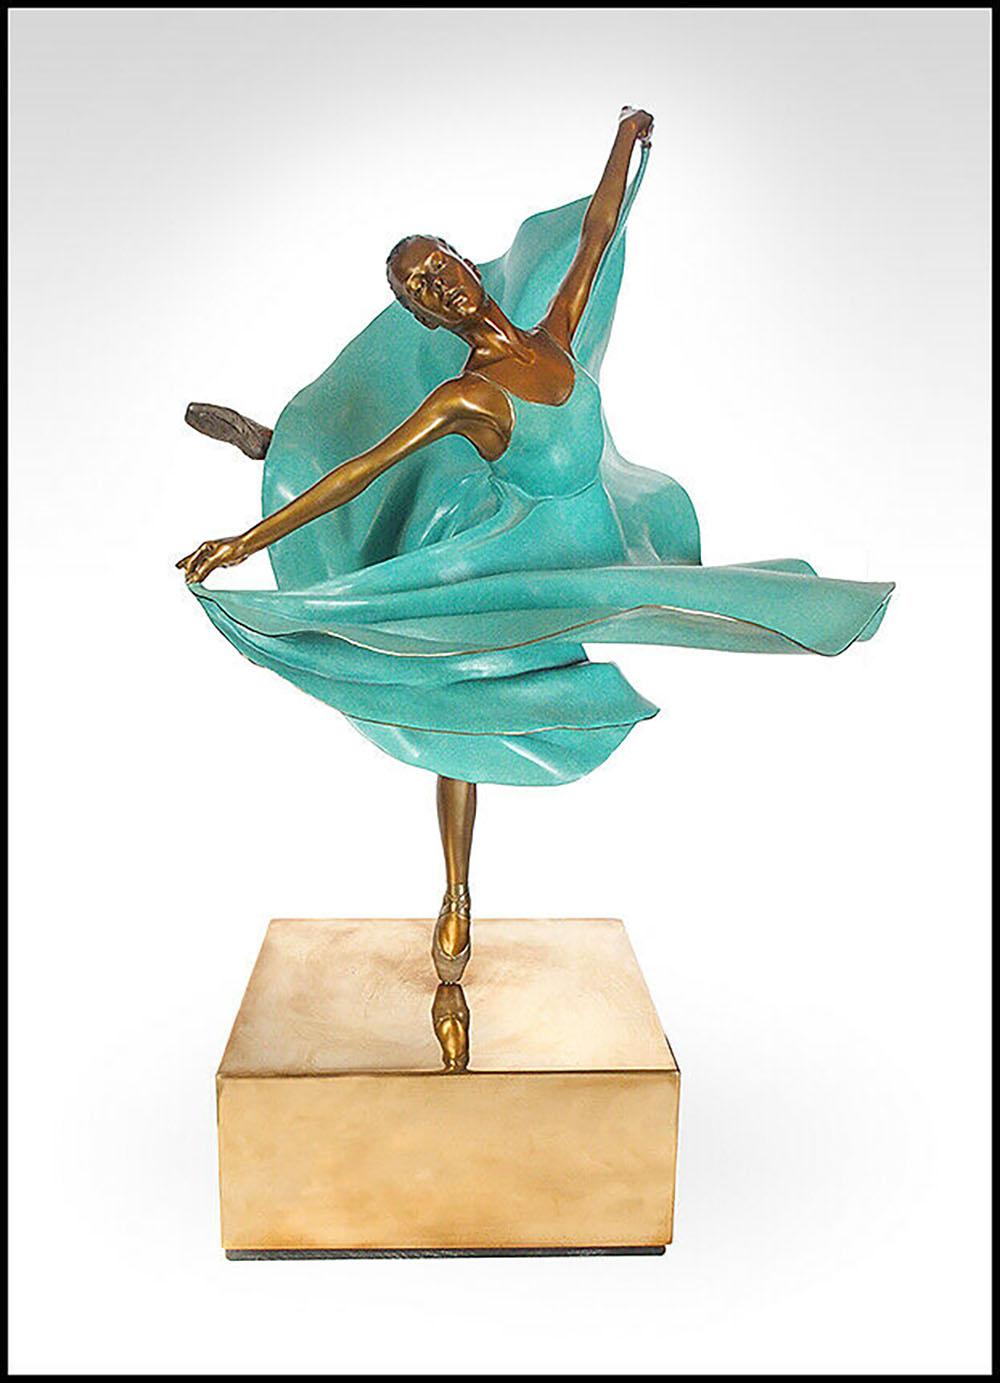 Ramon Parmenter Authentic and Original Bronze Sculpture "Entournant", on a working mortorized base and listed with the Submit Best Offer option

Accepting Offers Now:  Here we have something that is very rare to find (only 74 pieces in the edition),